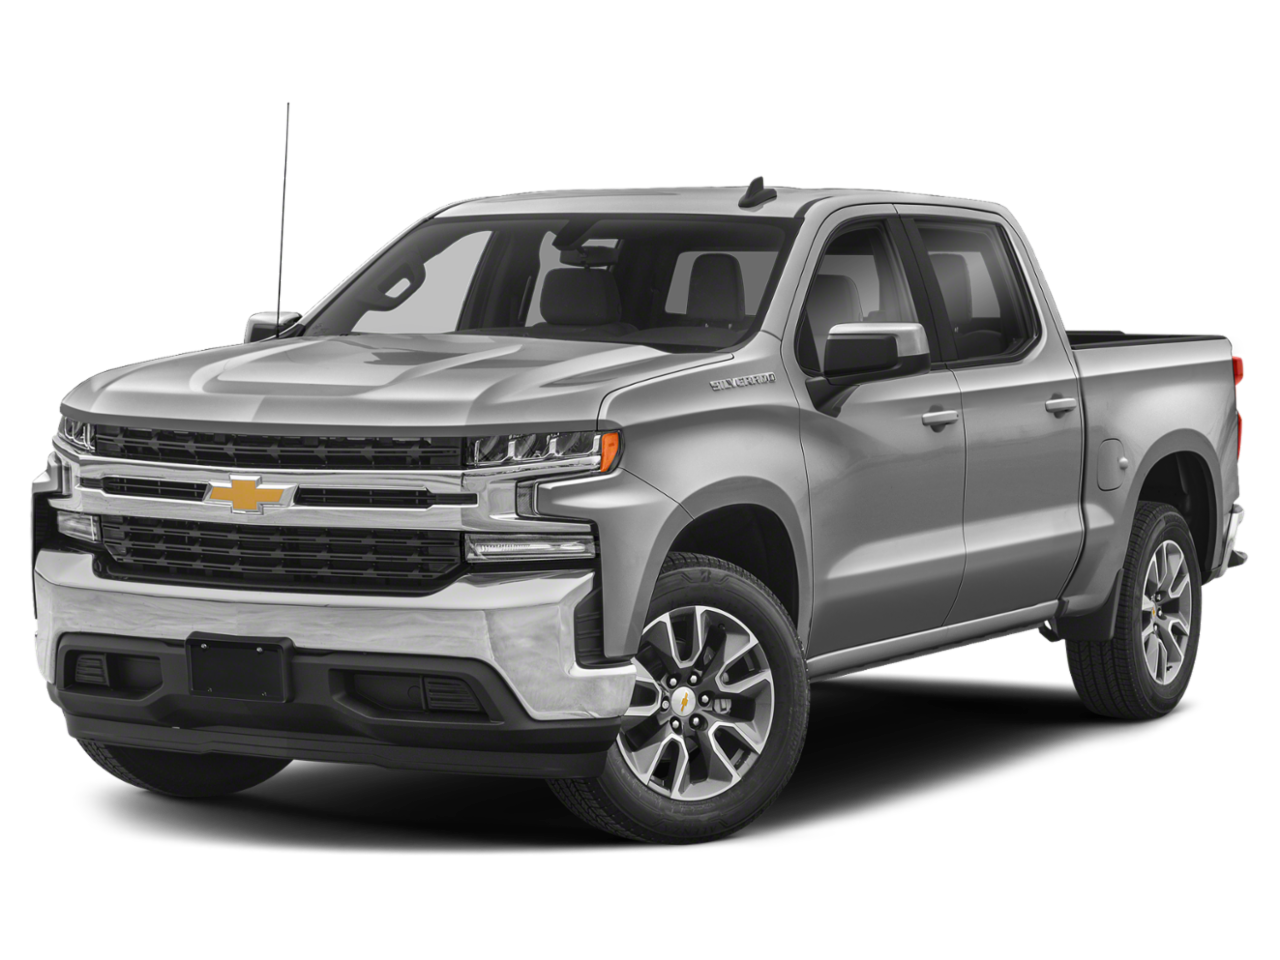 New Chevy & Used Car Dealer - H & L Chevrolet